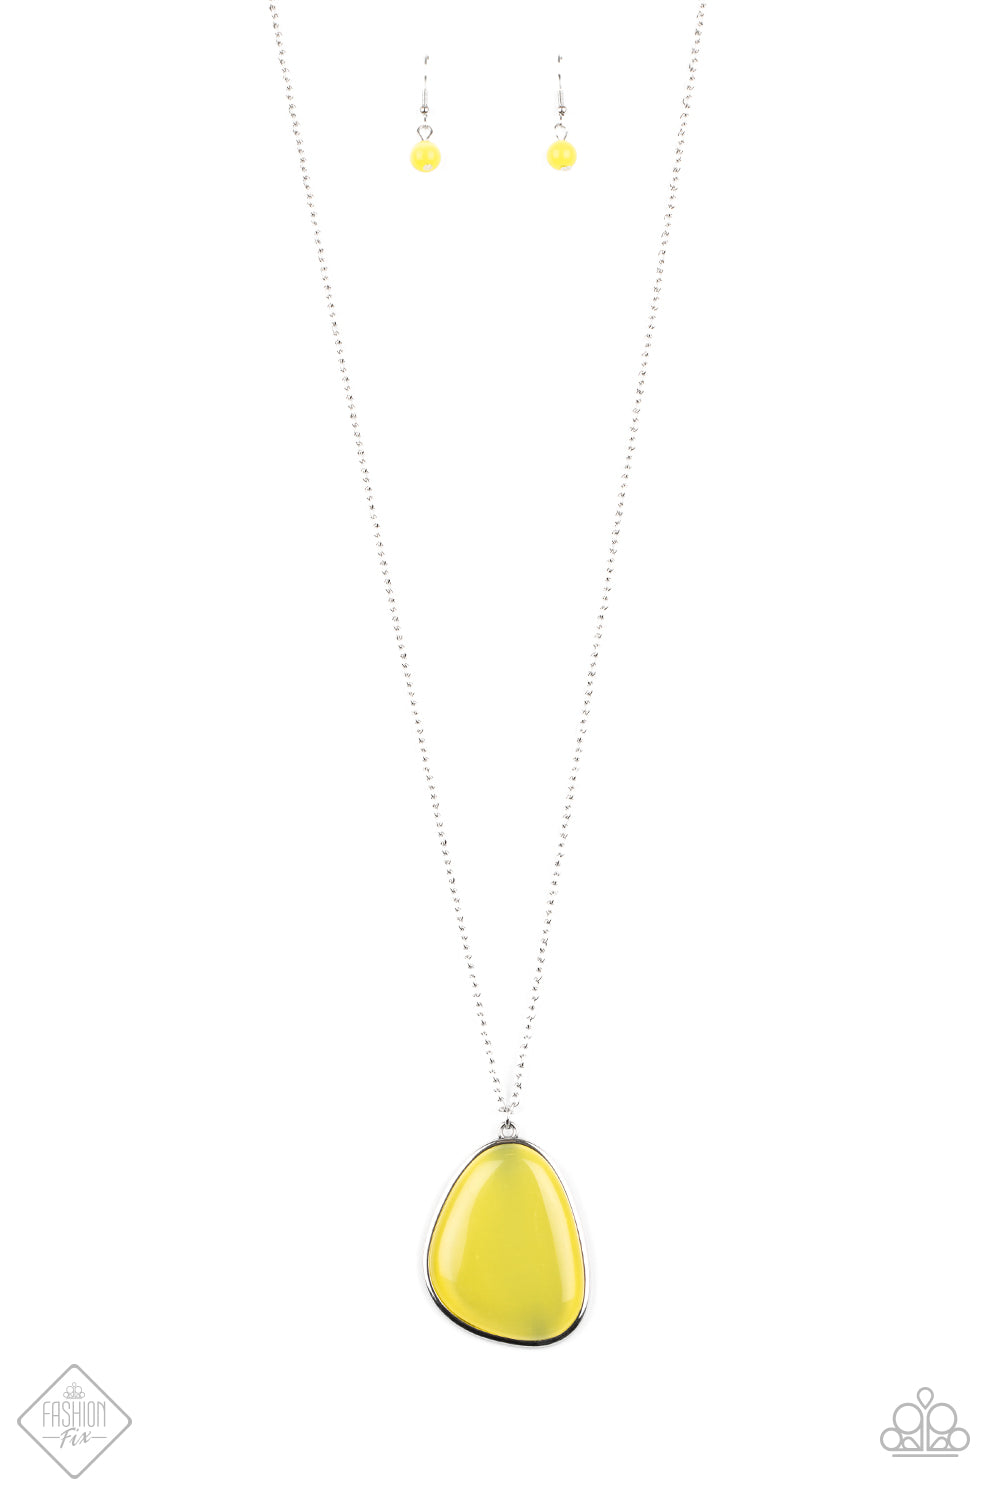 Paparazzi Necklace ~ Ethereal Experience - Yellow - Fashion Fix Aug2020